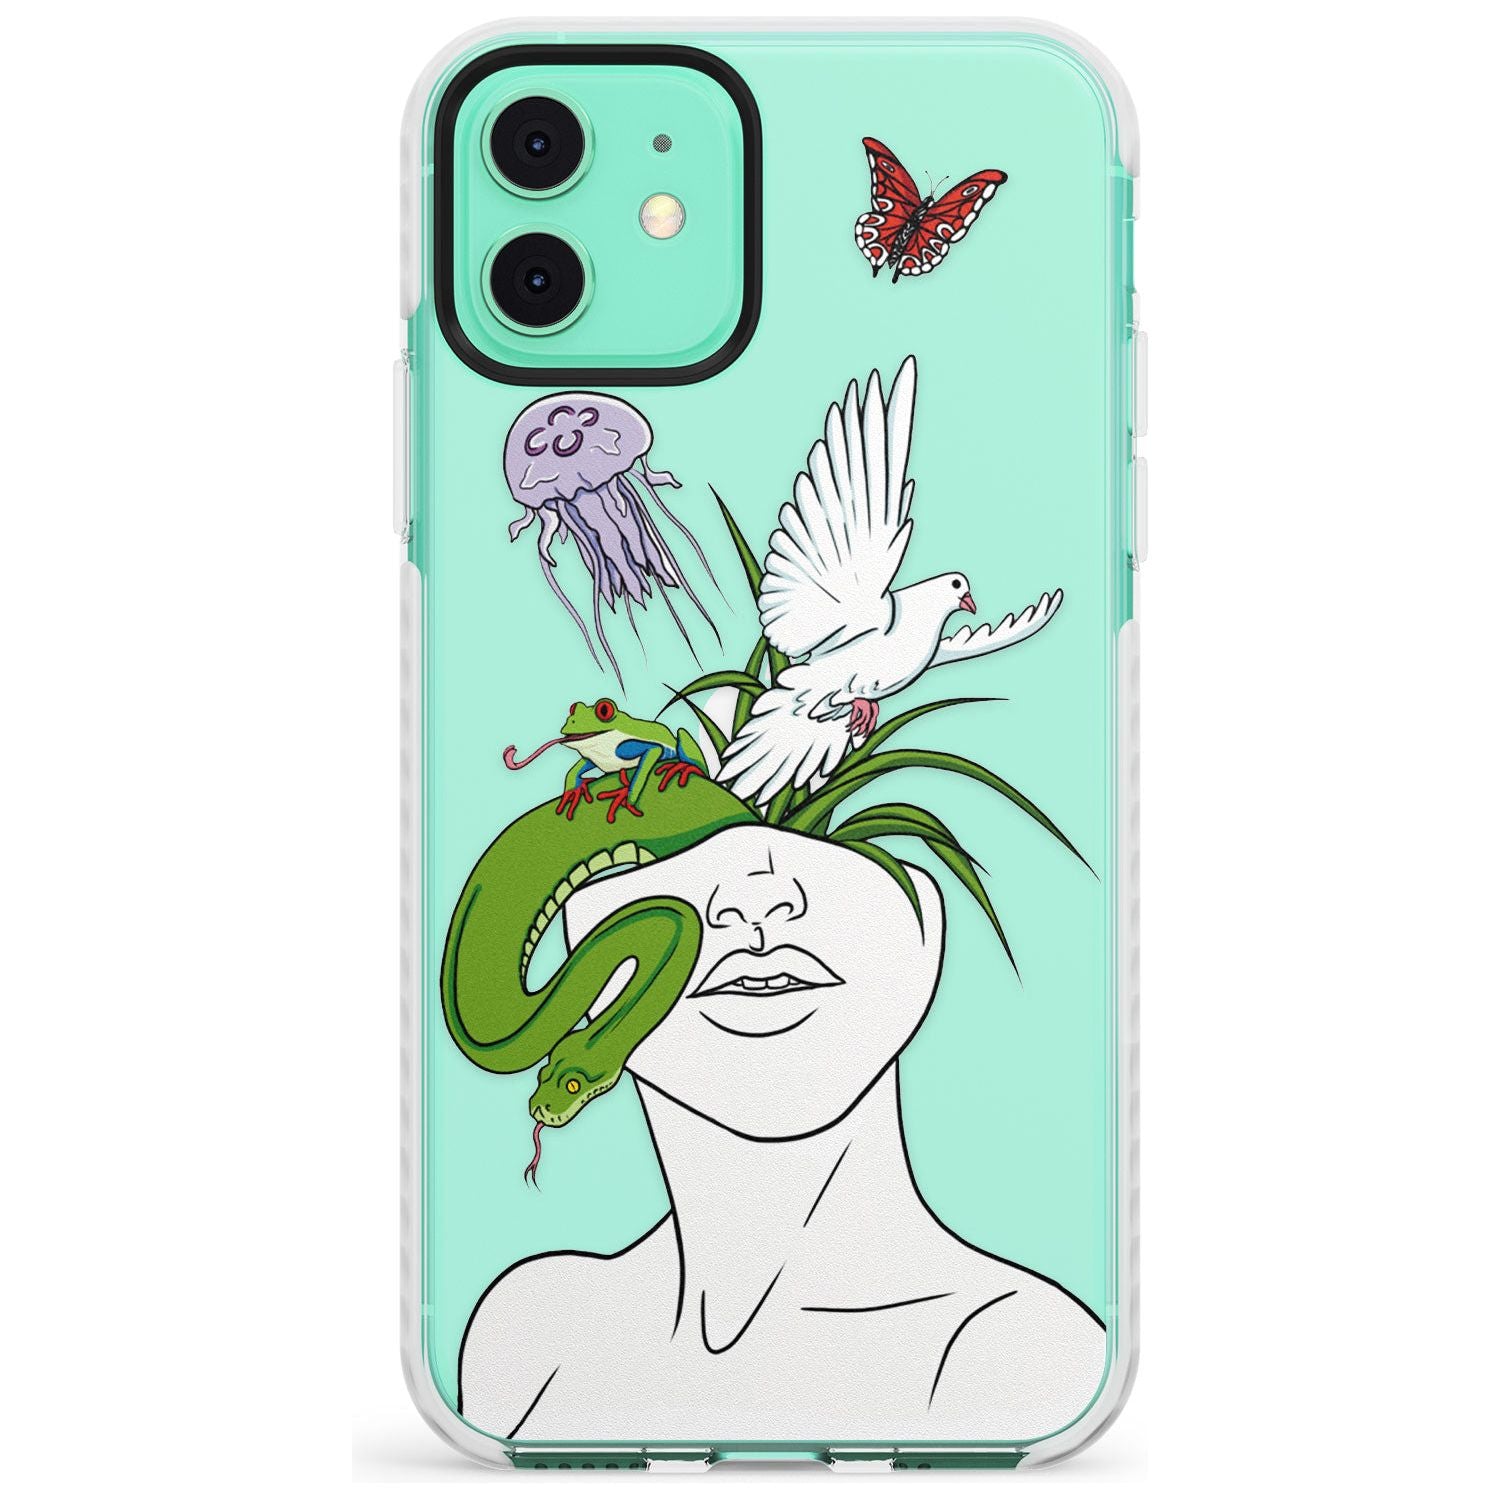 WILD THOUGHTS Slim TPU Phone Case for iPhone 11